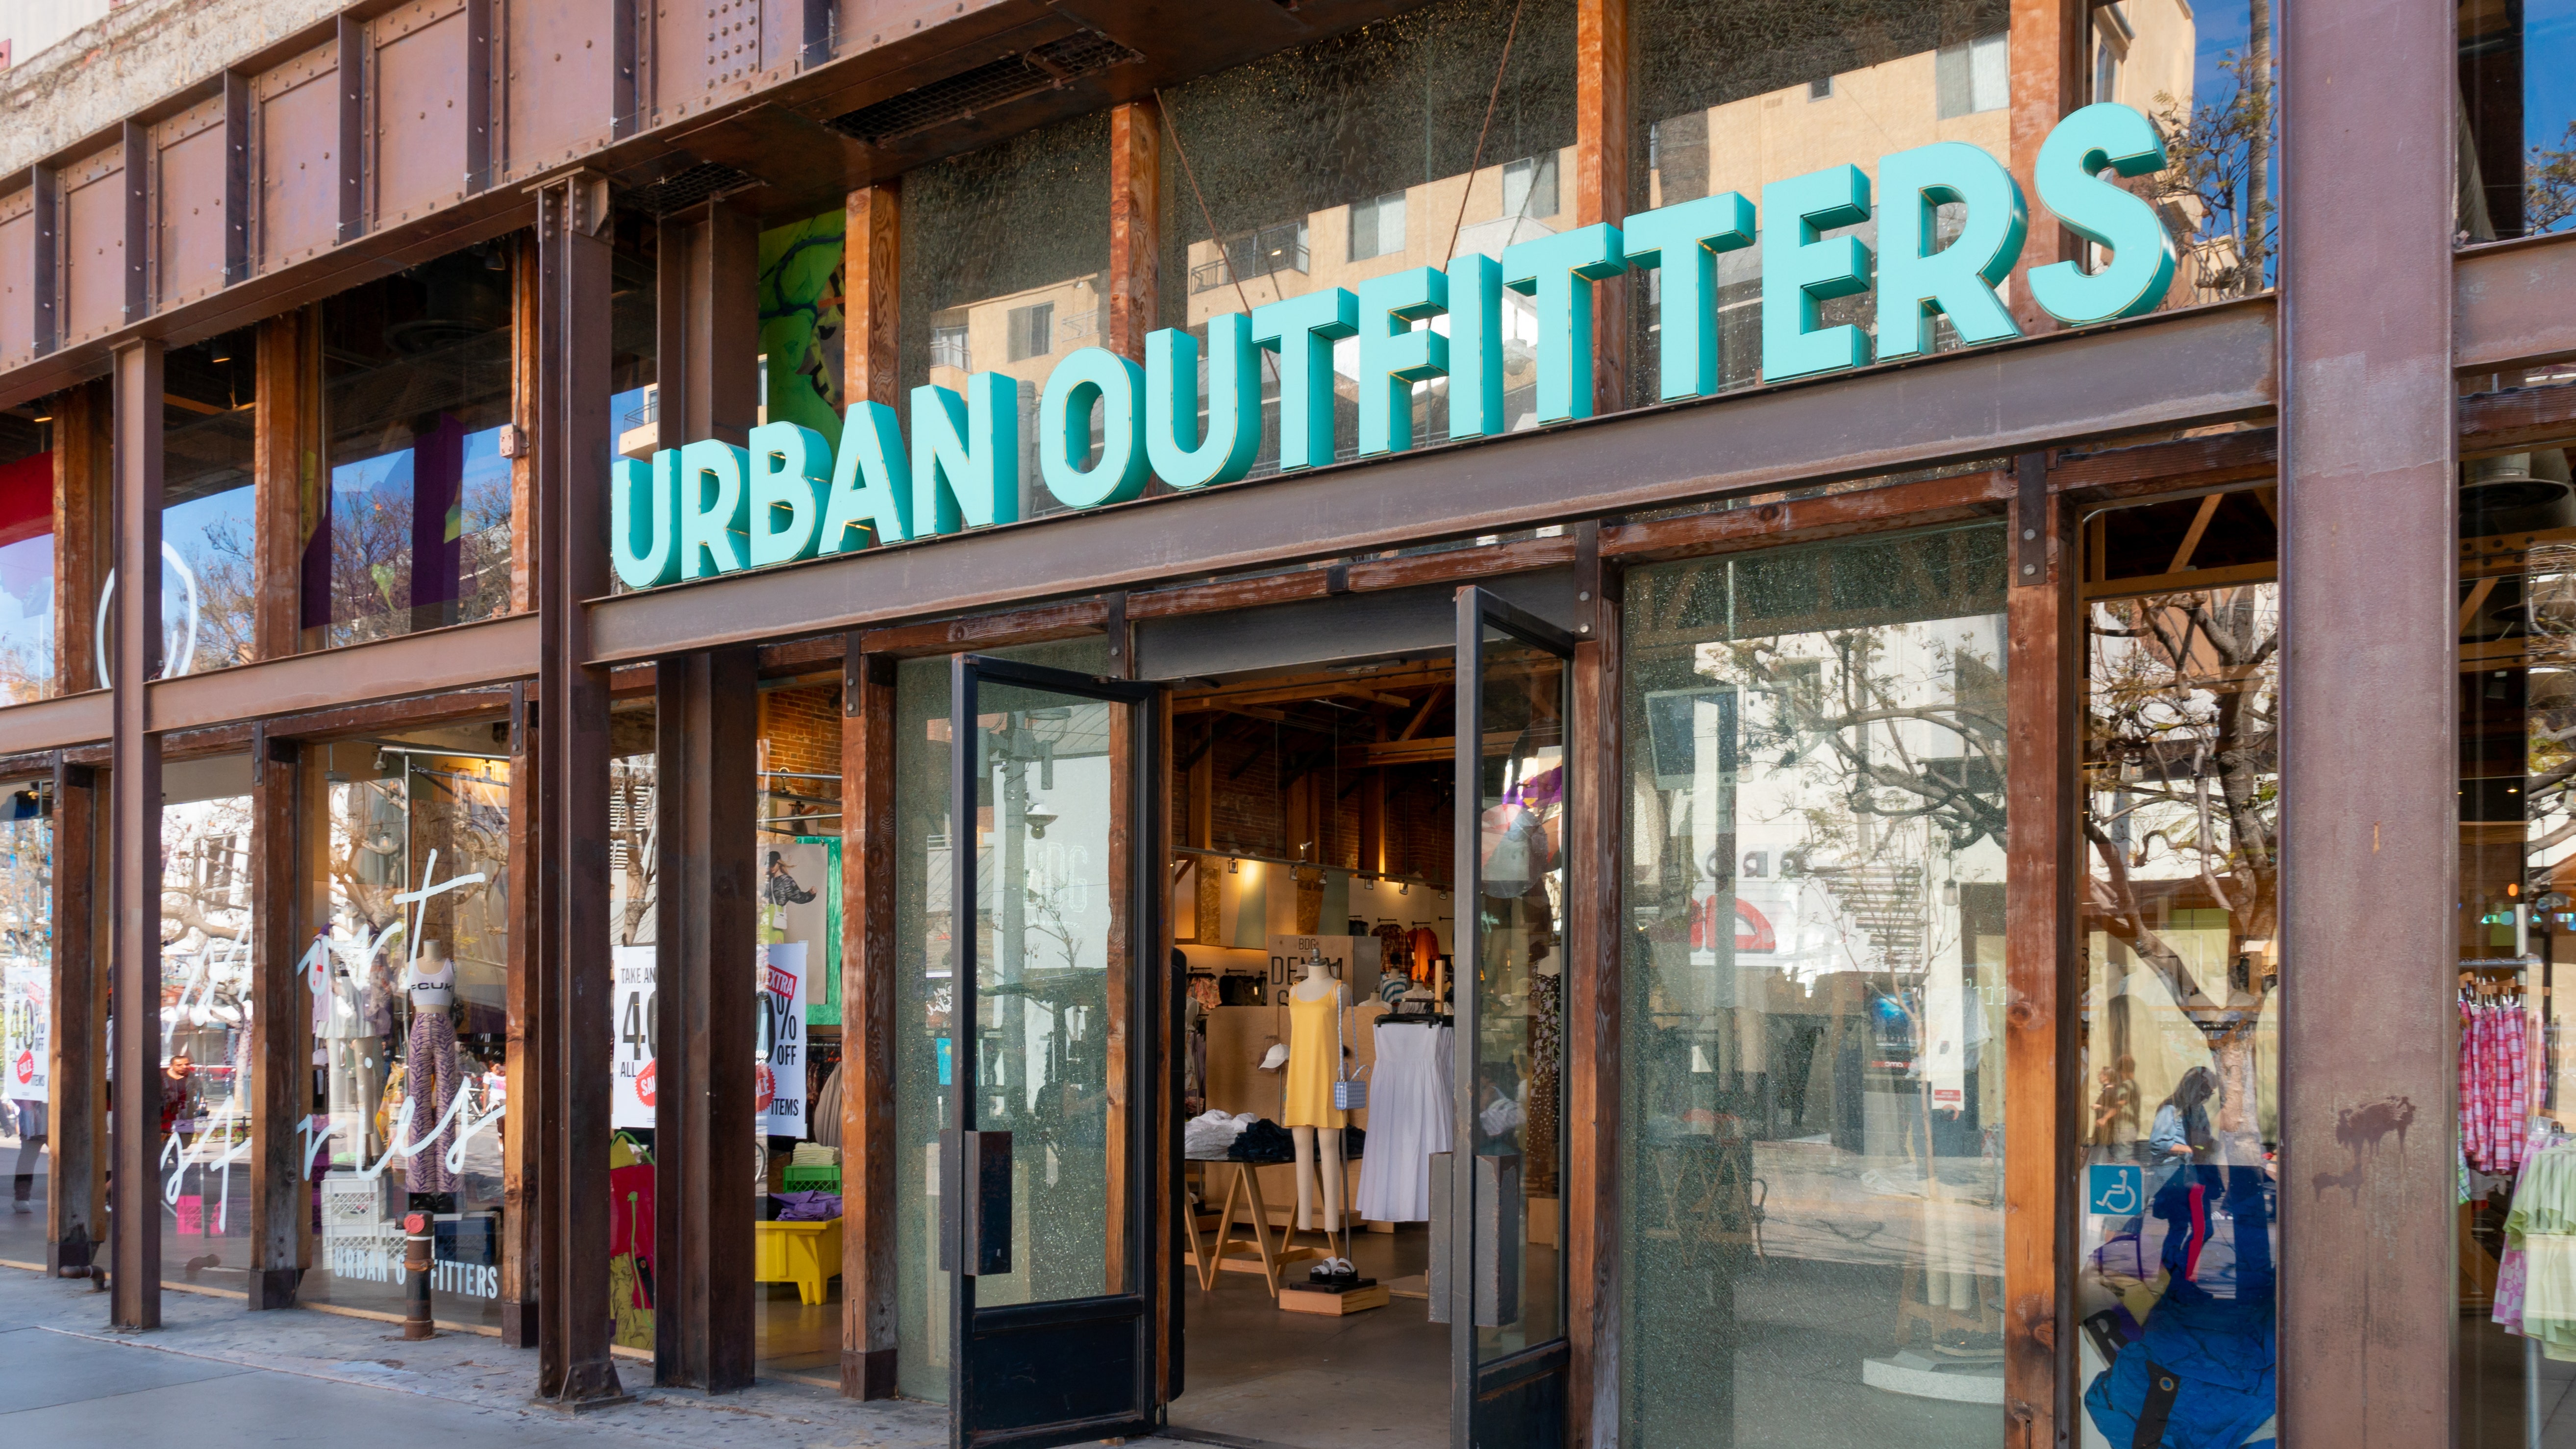 Urban Outfitters Wants Full-Time Employees to Work for Free